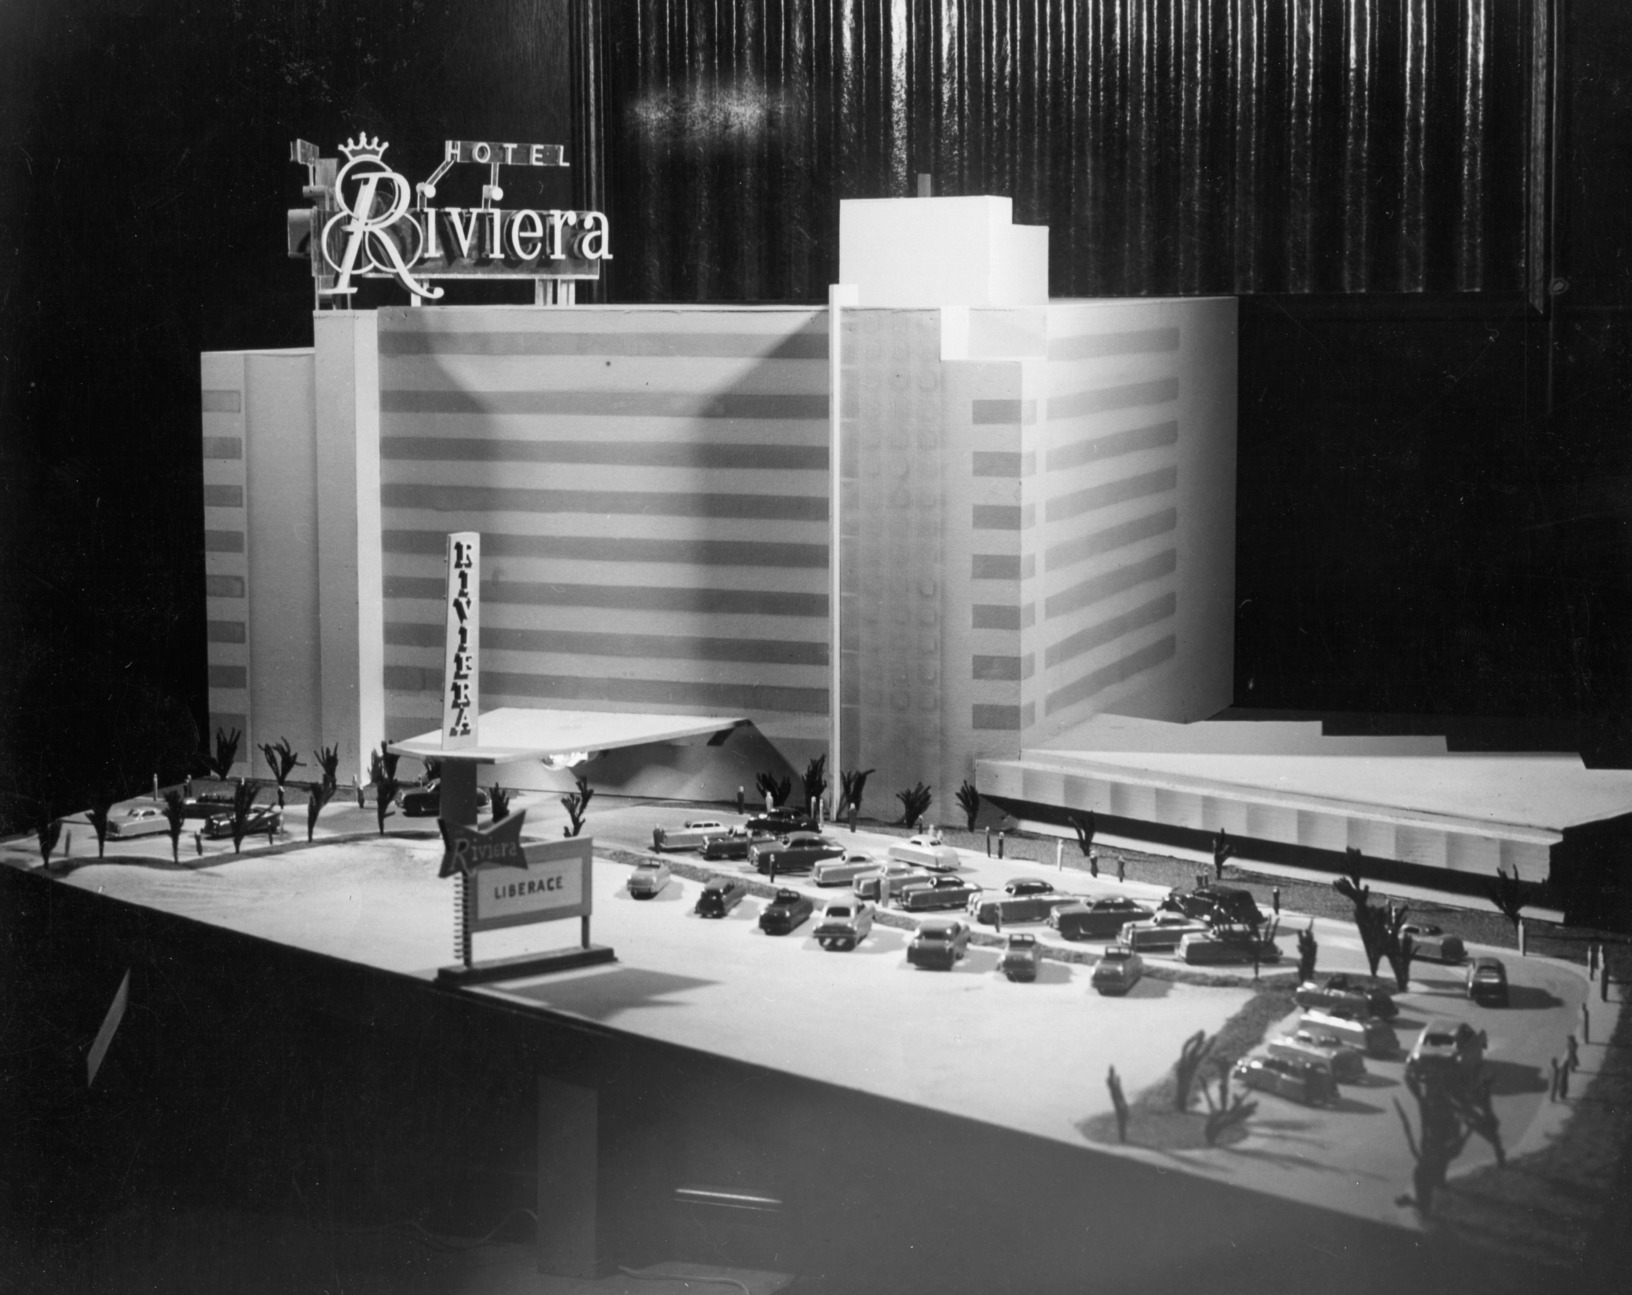 Photograph of a scale model of the Riviera Hotel and Casino (Las Vegas), 1955